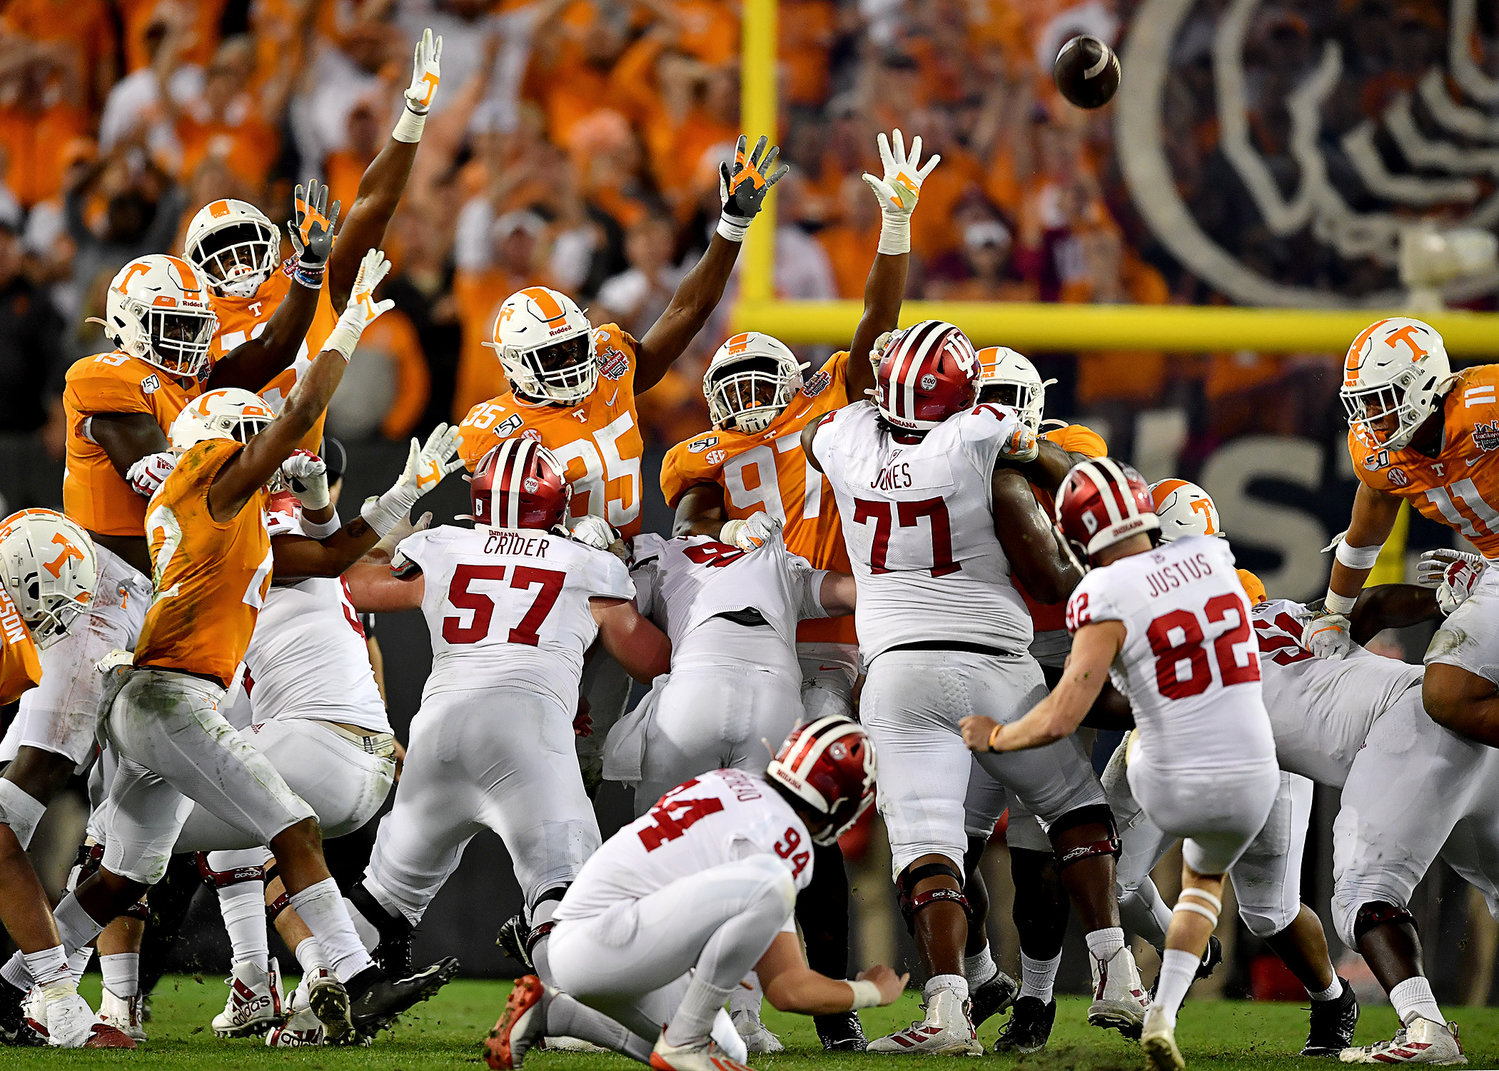 The Indiana Hoosiers attempt, but miss, a field goal in the closing minutes of their one-point loss to the Tennessee Volunteers in the Gator Bowl Thursday, January 2, 2020, at TIAA Bank Field in Jacksonville, Fla.